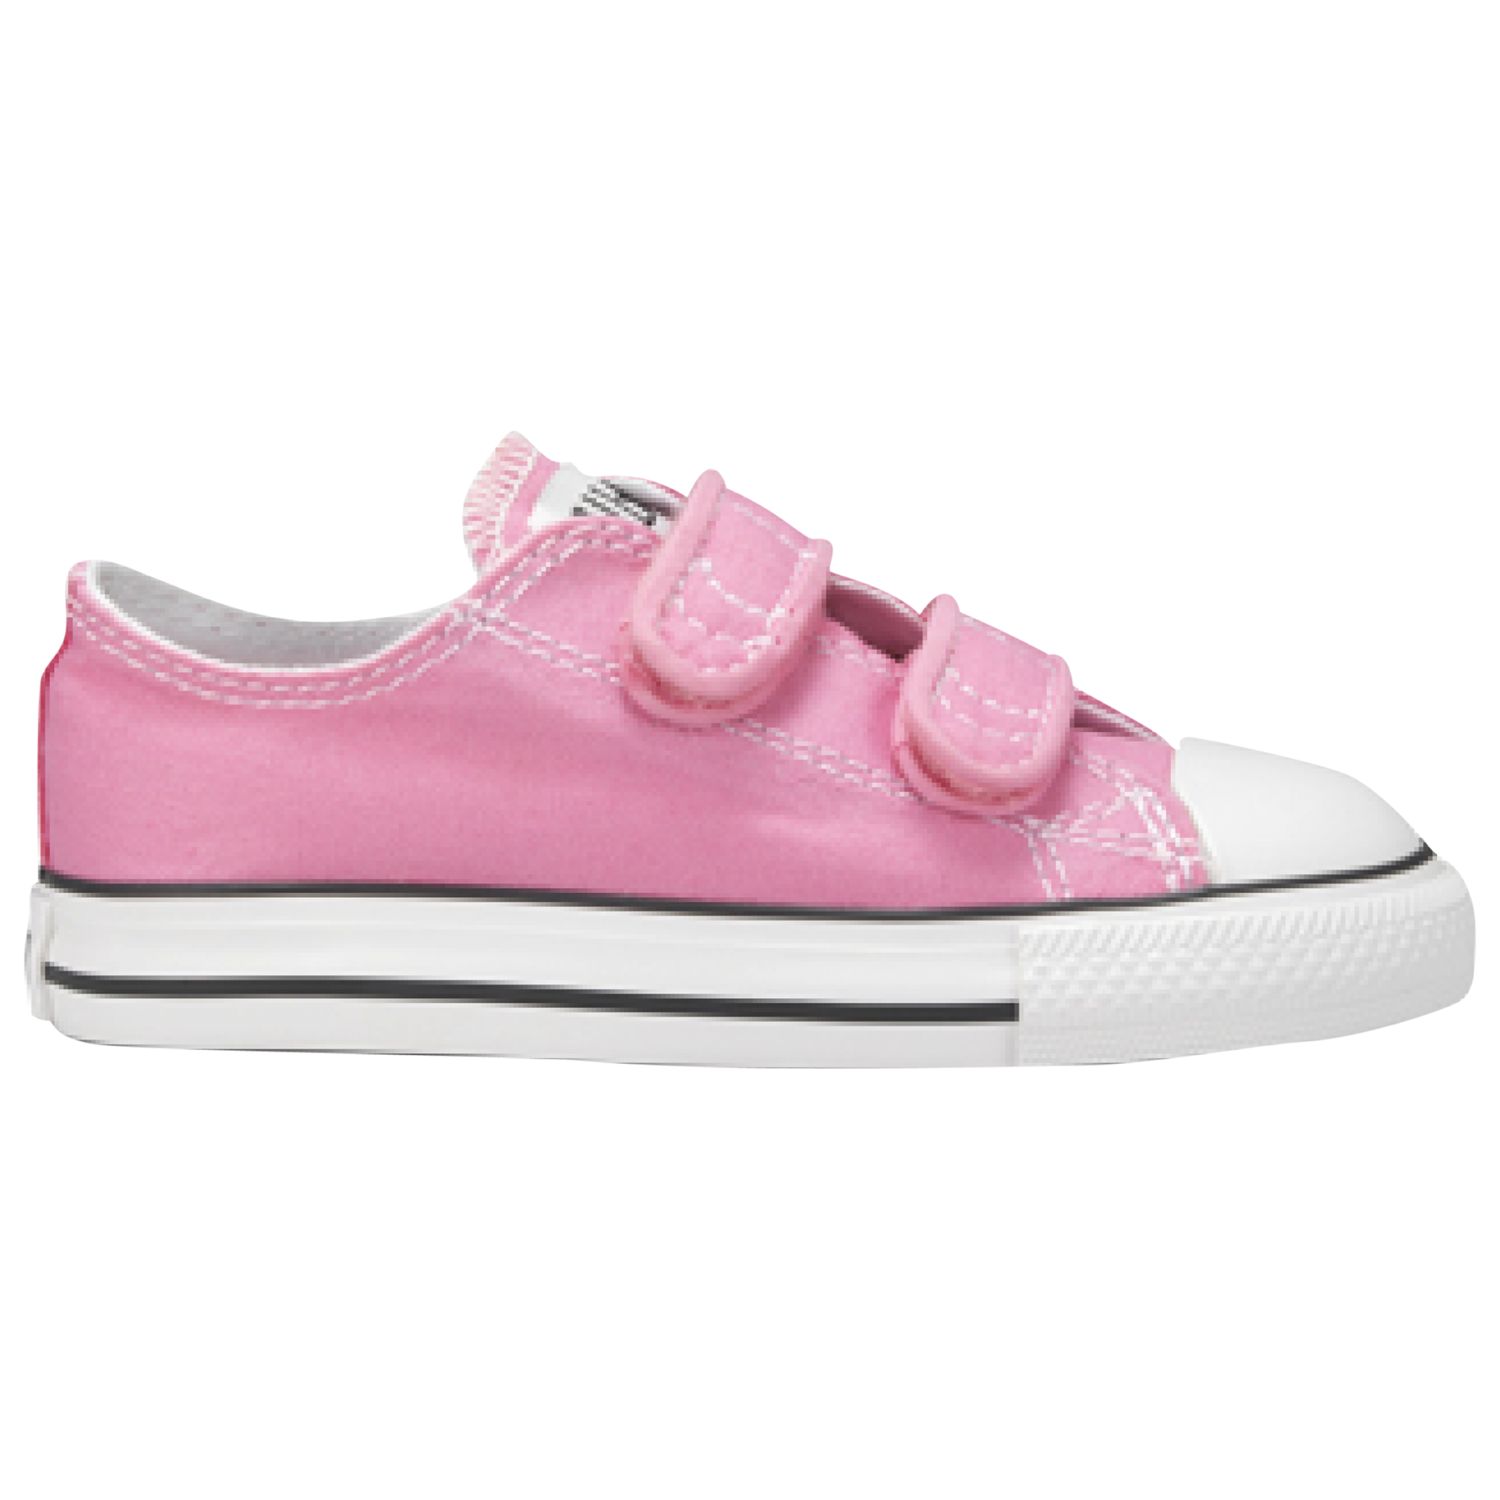 Converse Children's Chuck Taylor All Star Riptape Trainers, Pink, 6 Jnr